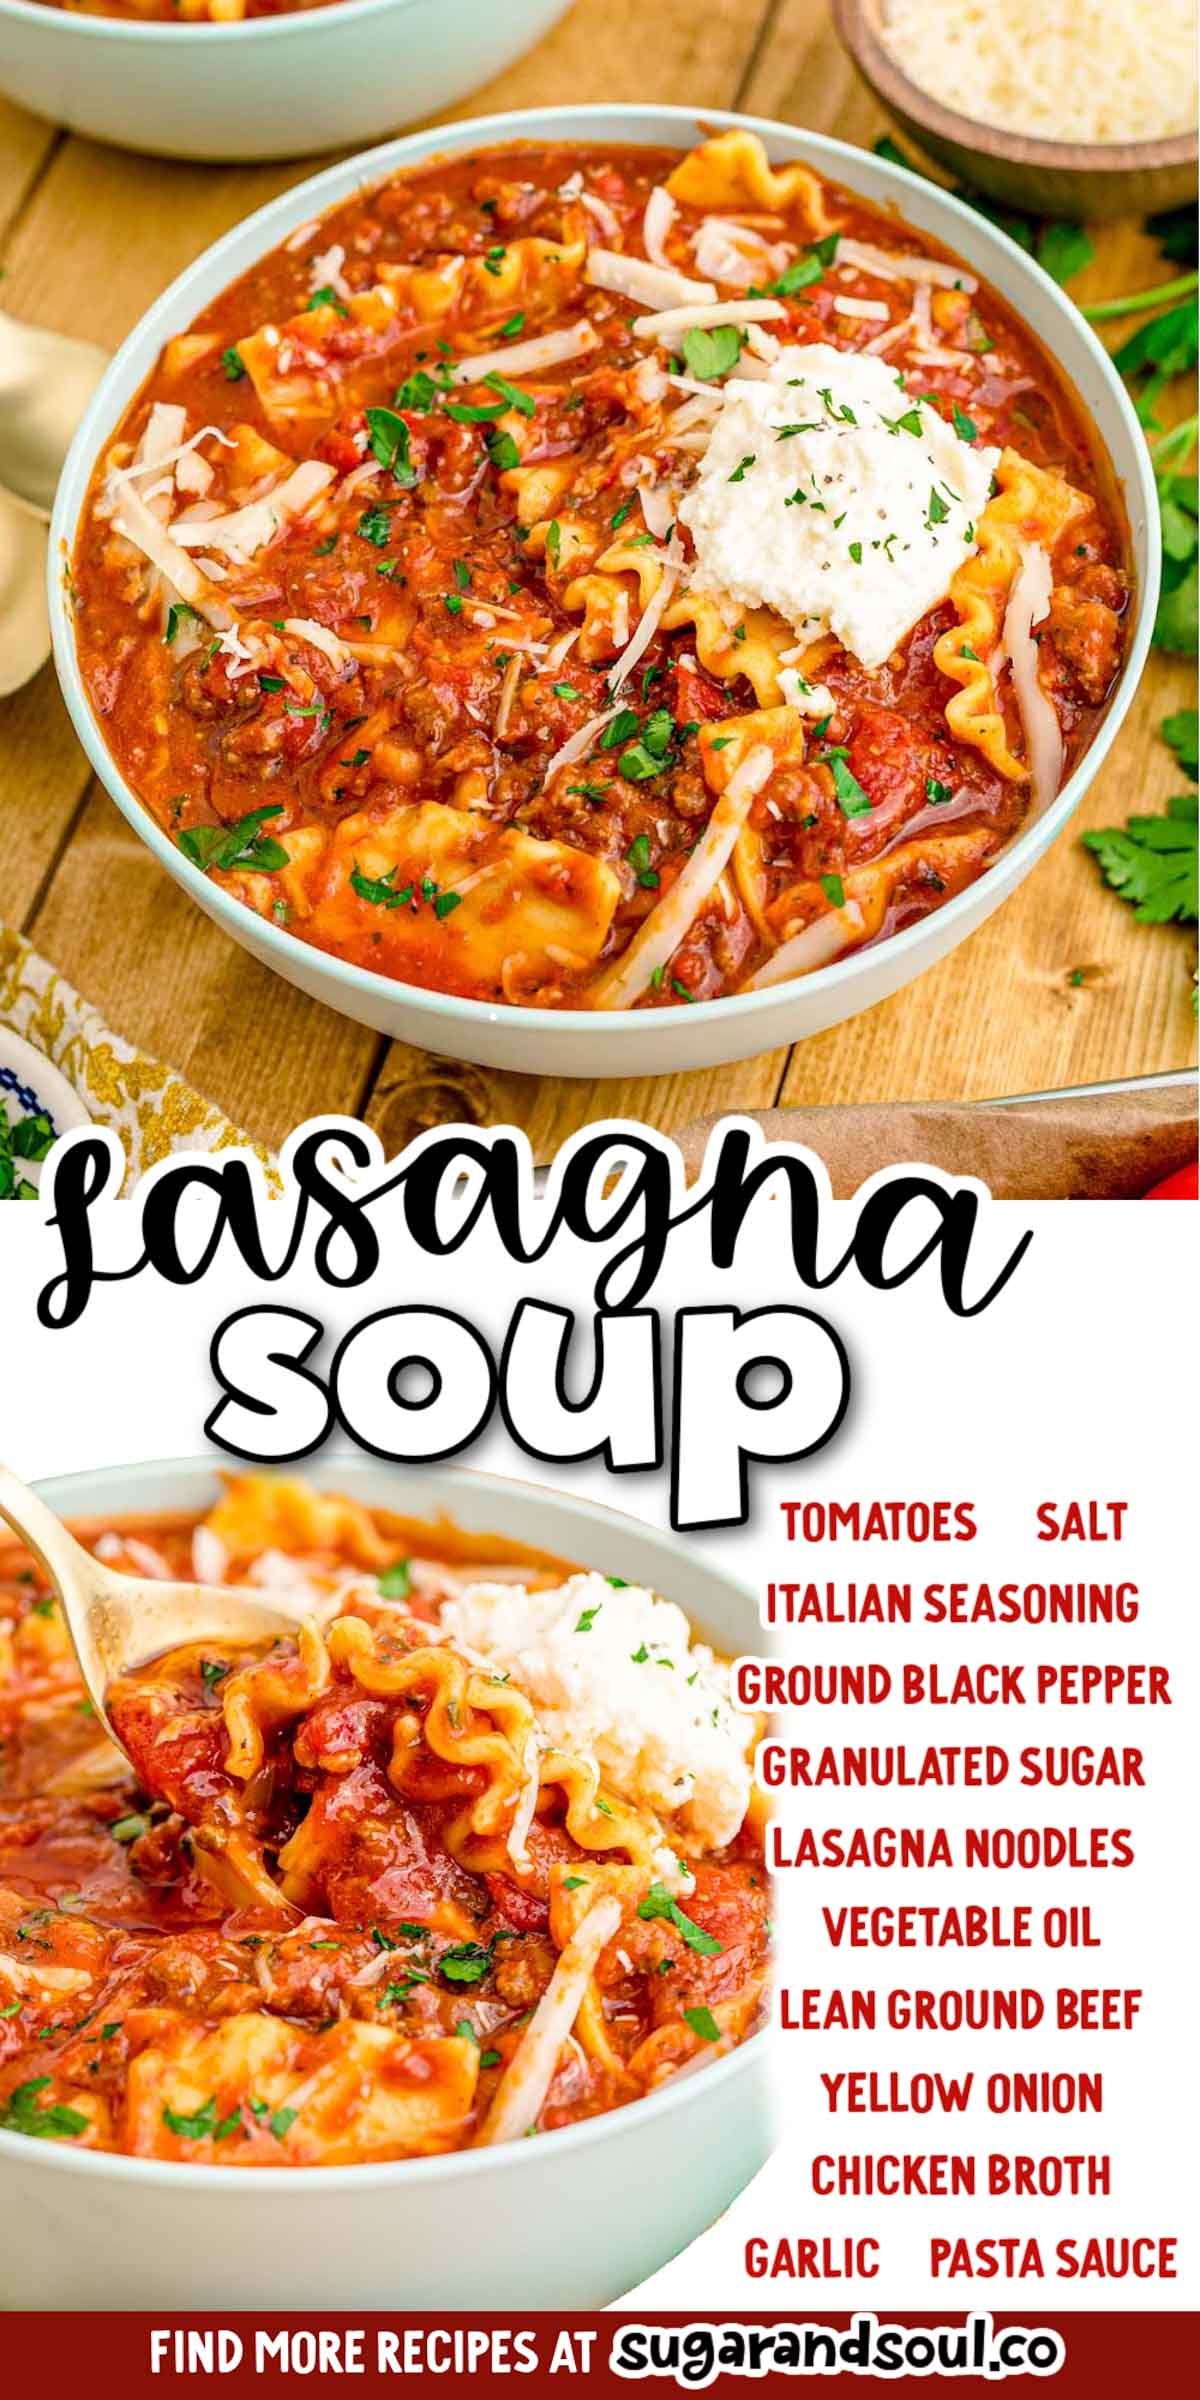 This cozy and hearty Lasagna Soup is filled with ground beef, lasagna noodles, chicken broth, and your favorite jar of pasta sauce! Takes just 10 minutes of hands-on prep time to make! via @sugarandsoulco